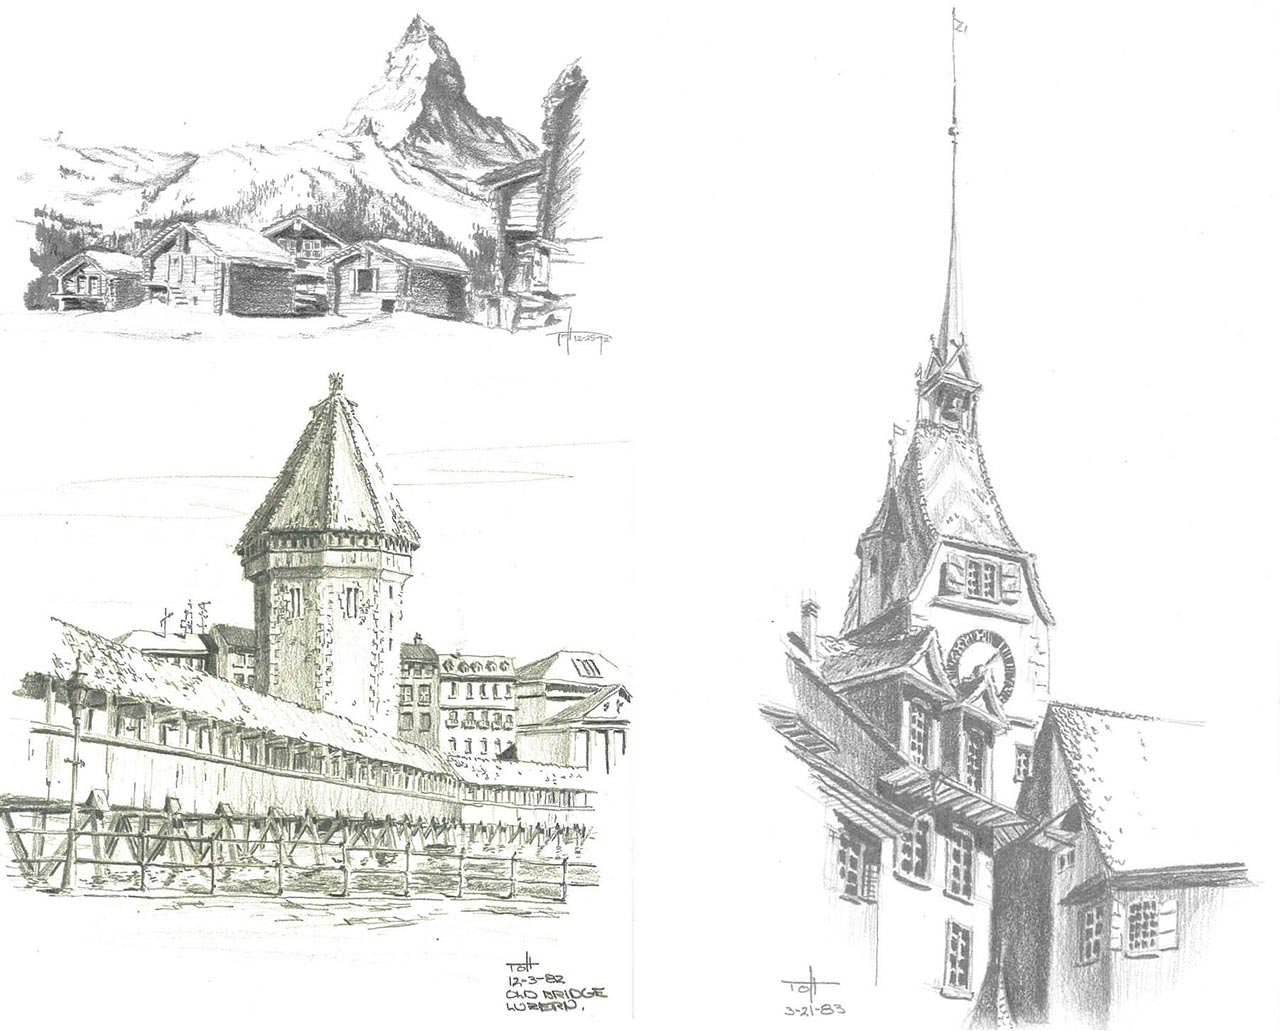 Sketches of European cottages, bridge, and clock tower